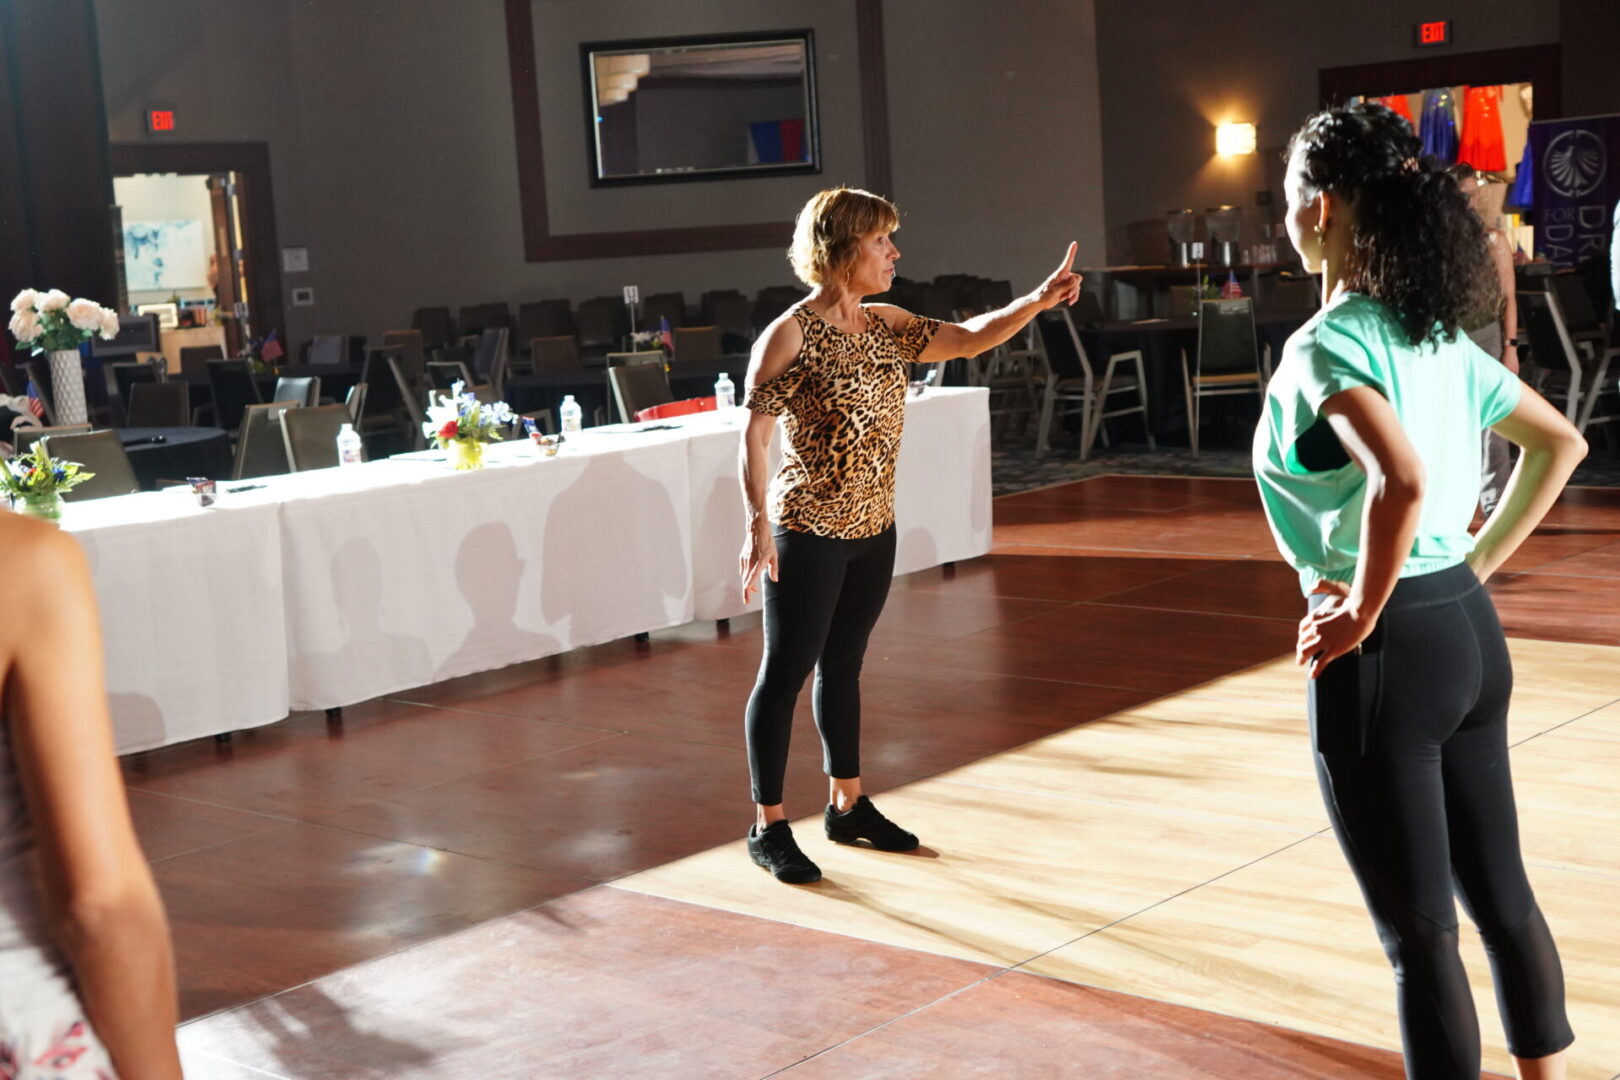 Two women are dancing on a dance floor.